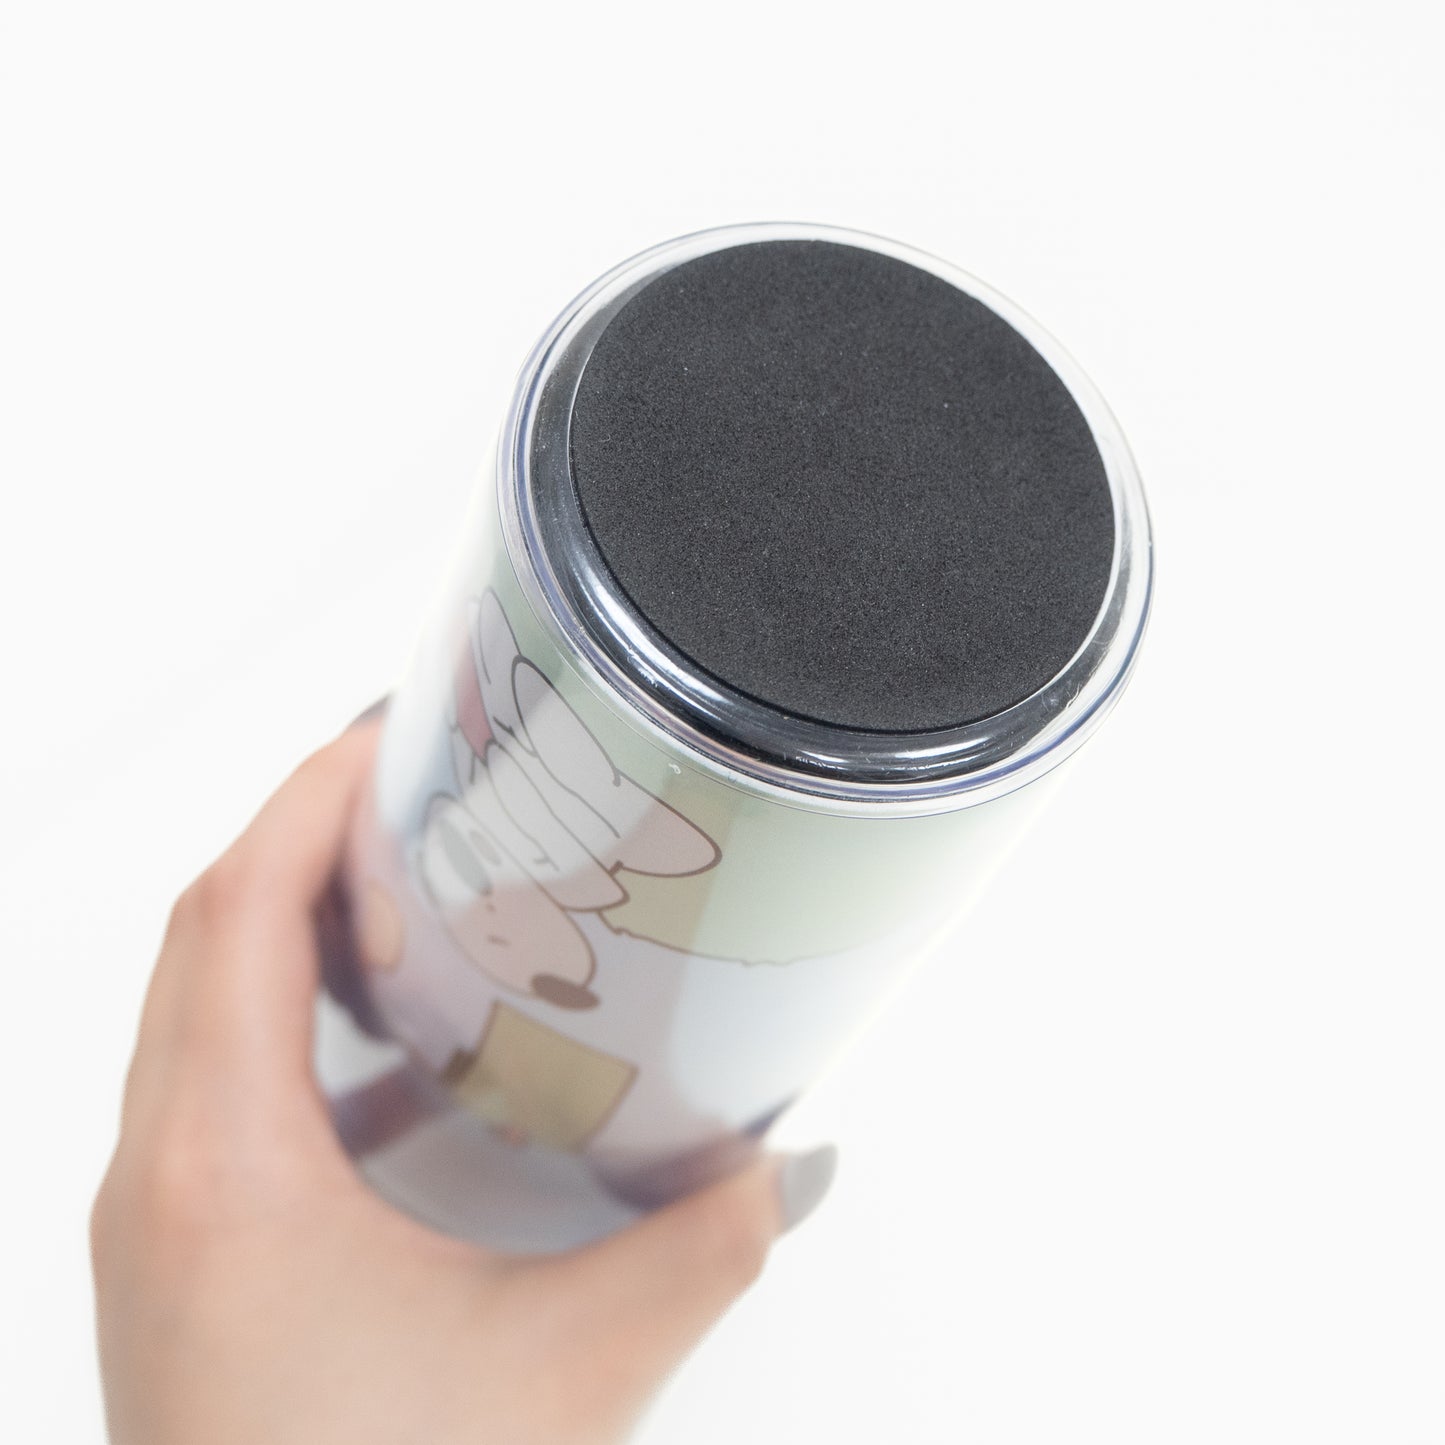 [Parent and child dolphin] Stainless steel tumbler [shipped in early January]